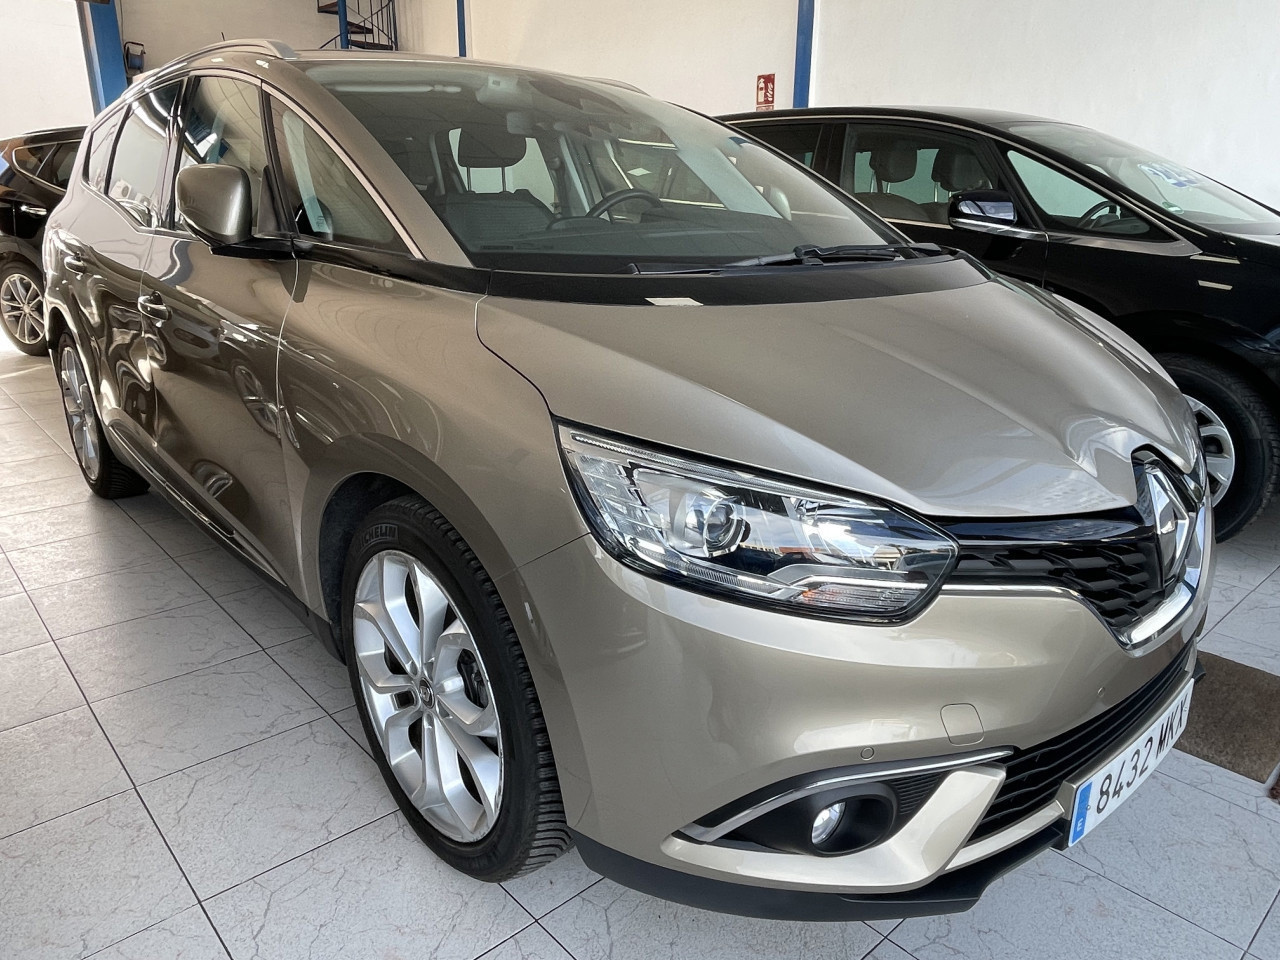 Renault Grand Scenic 1.5 Dci Automático People carrier Foto